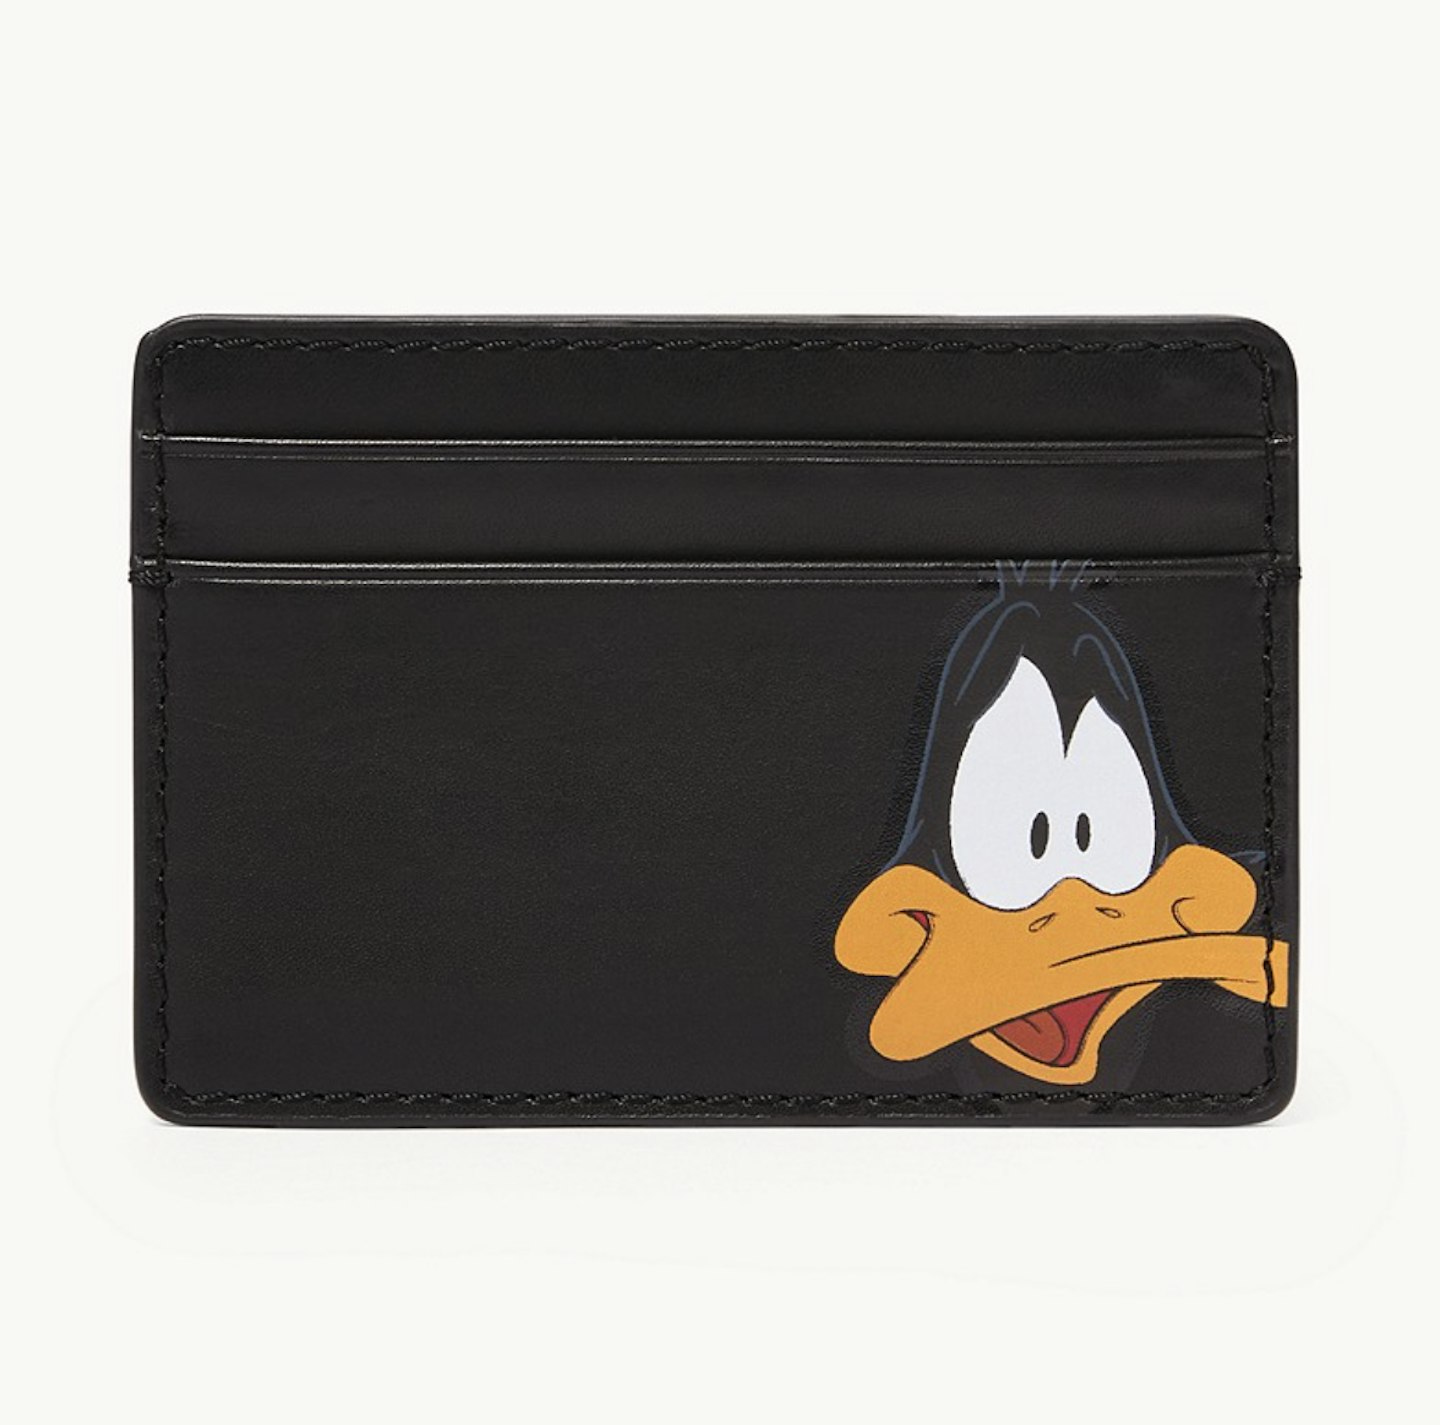 Space Jam by Fossil Daffy Duck Card Case